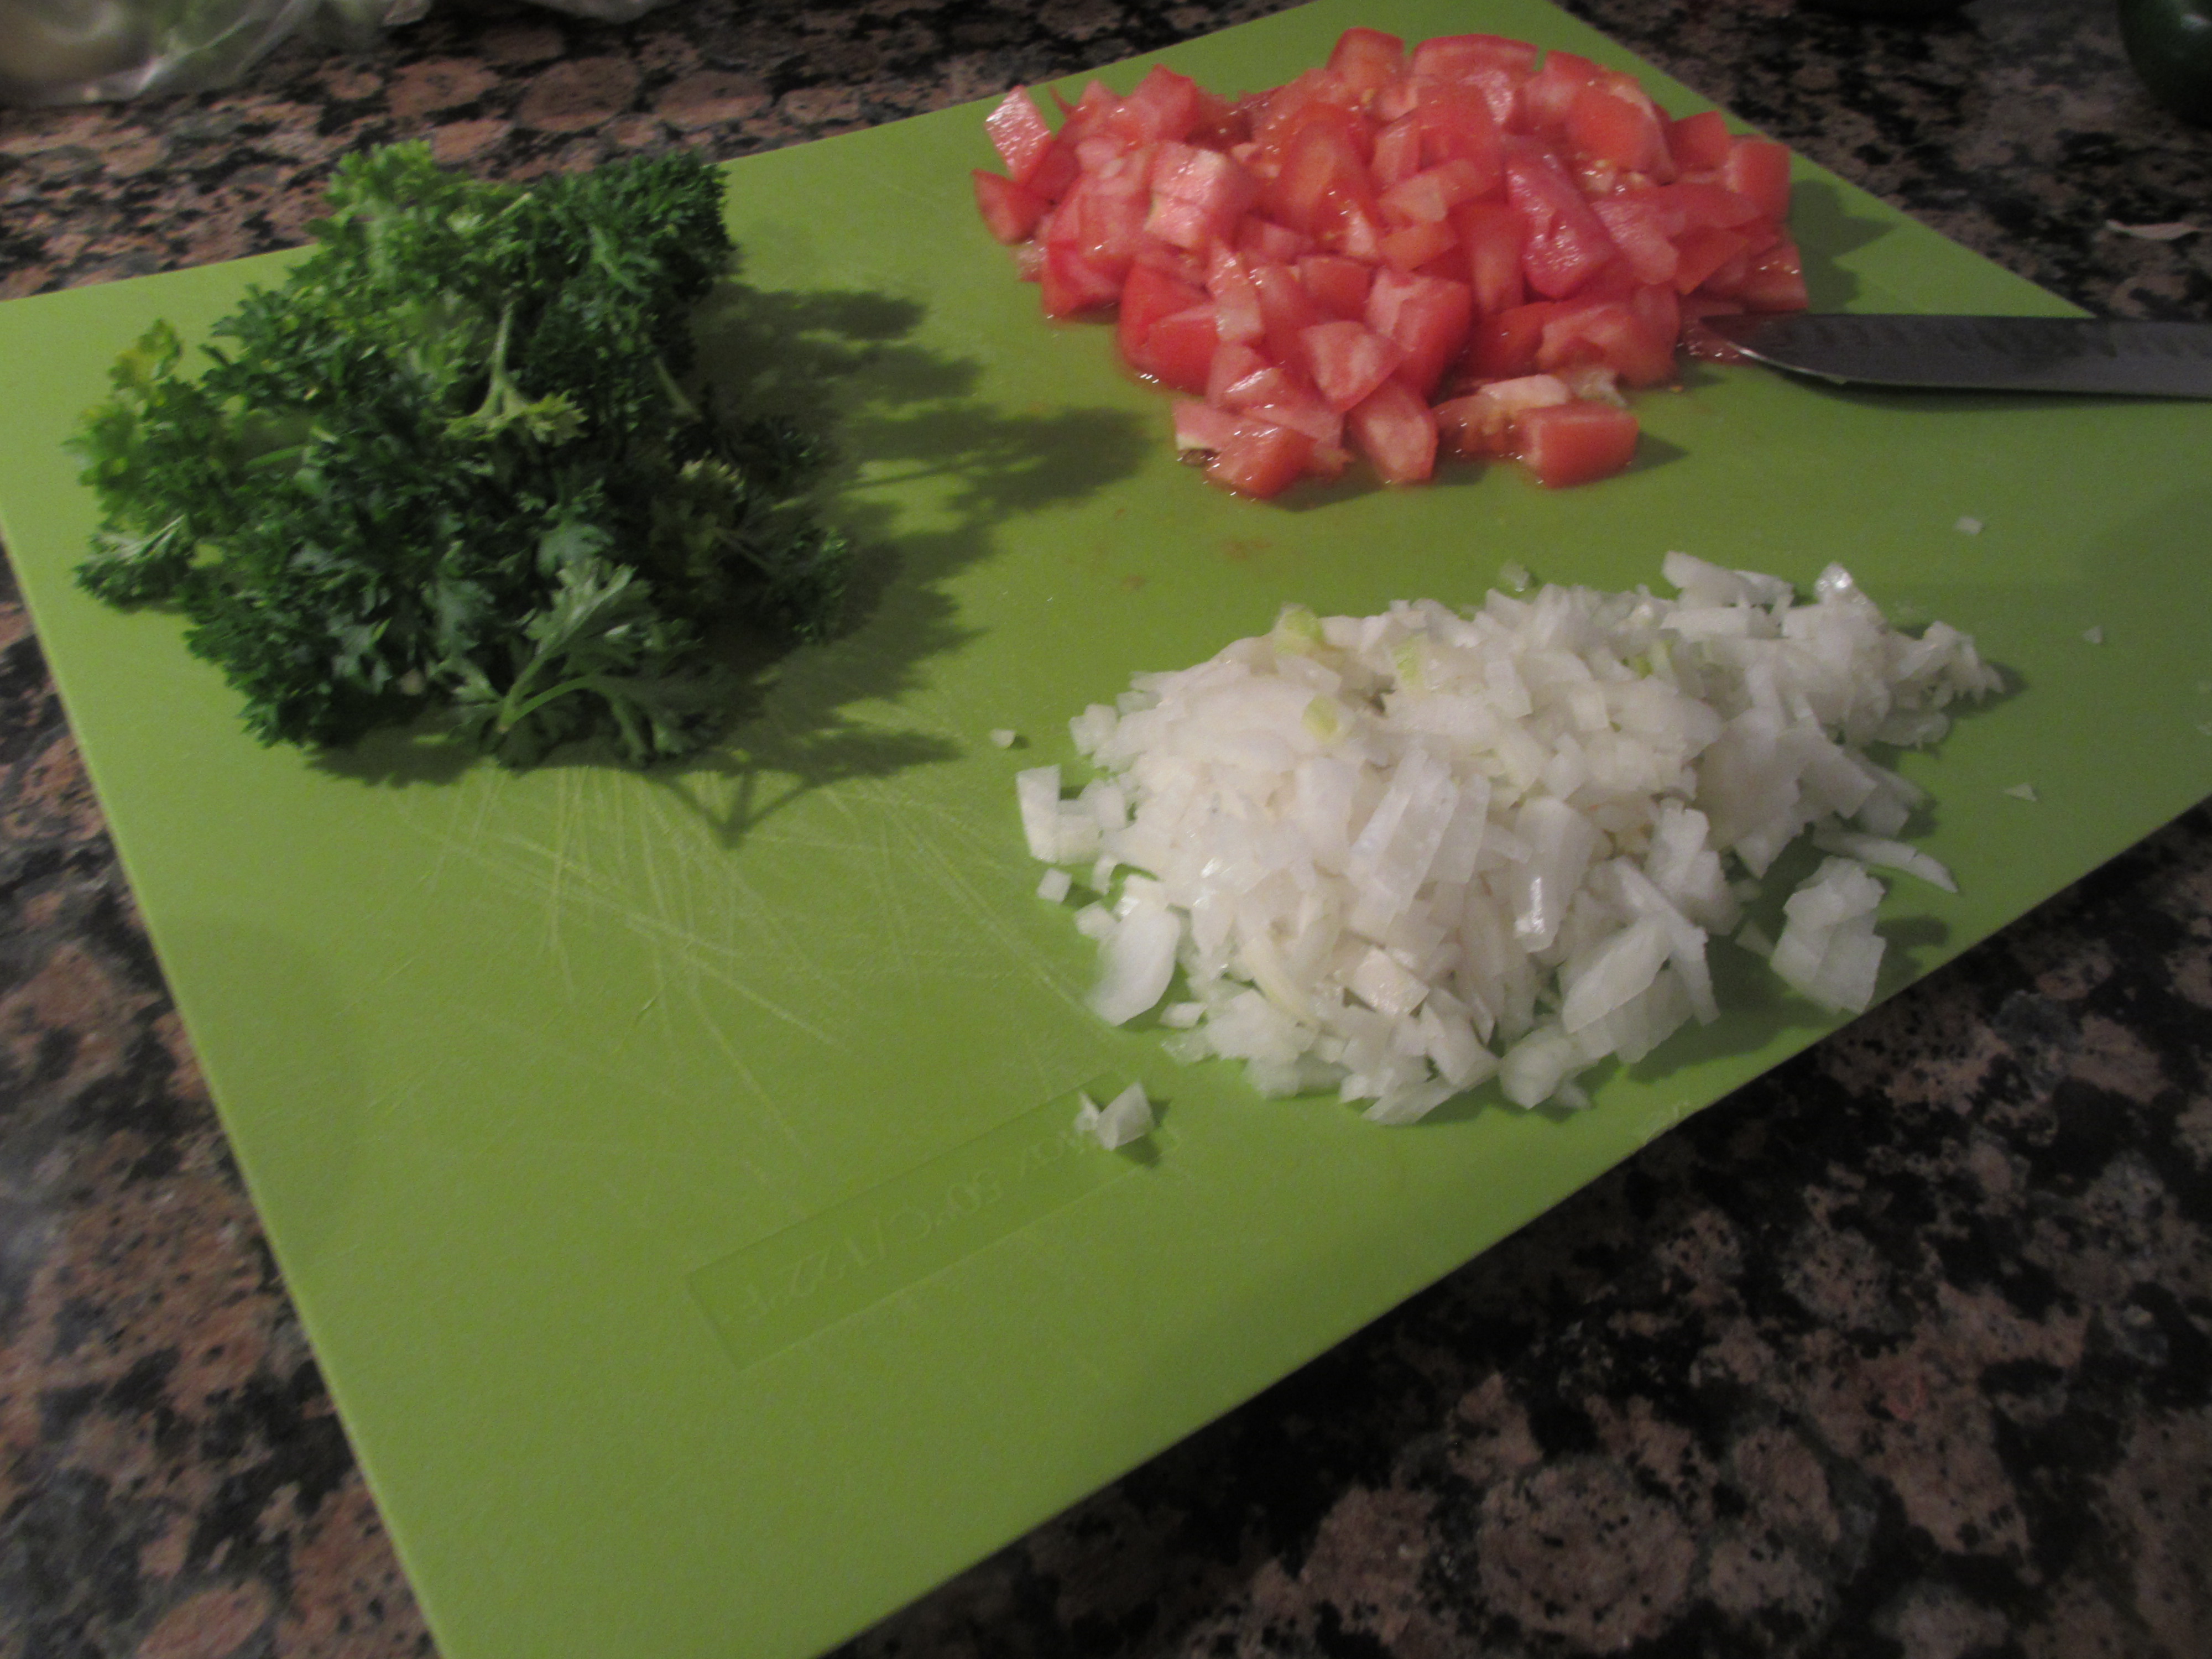 parsley, onions, and tomatoes